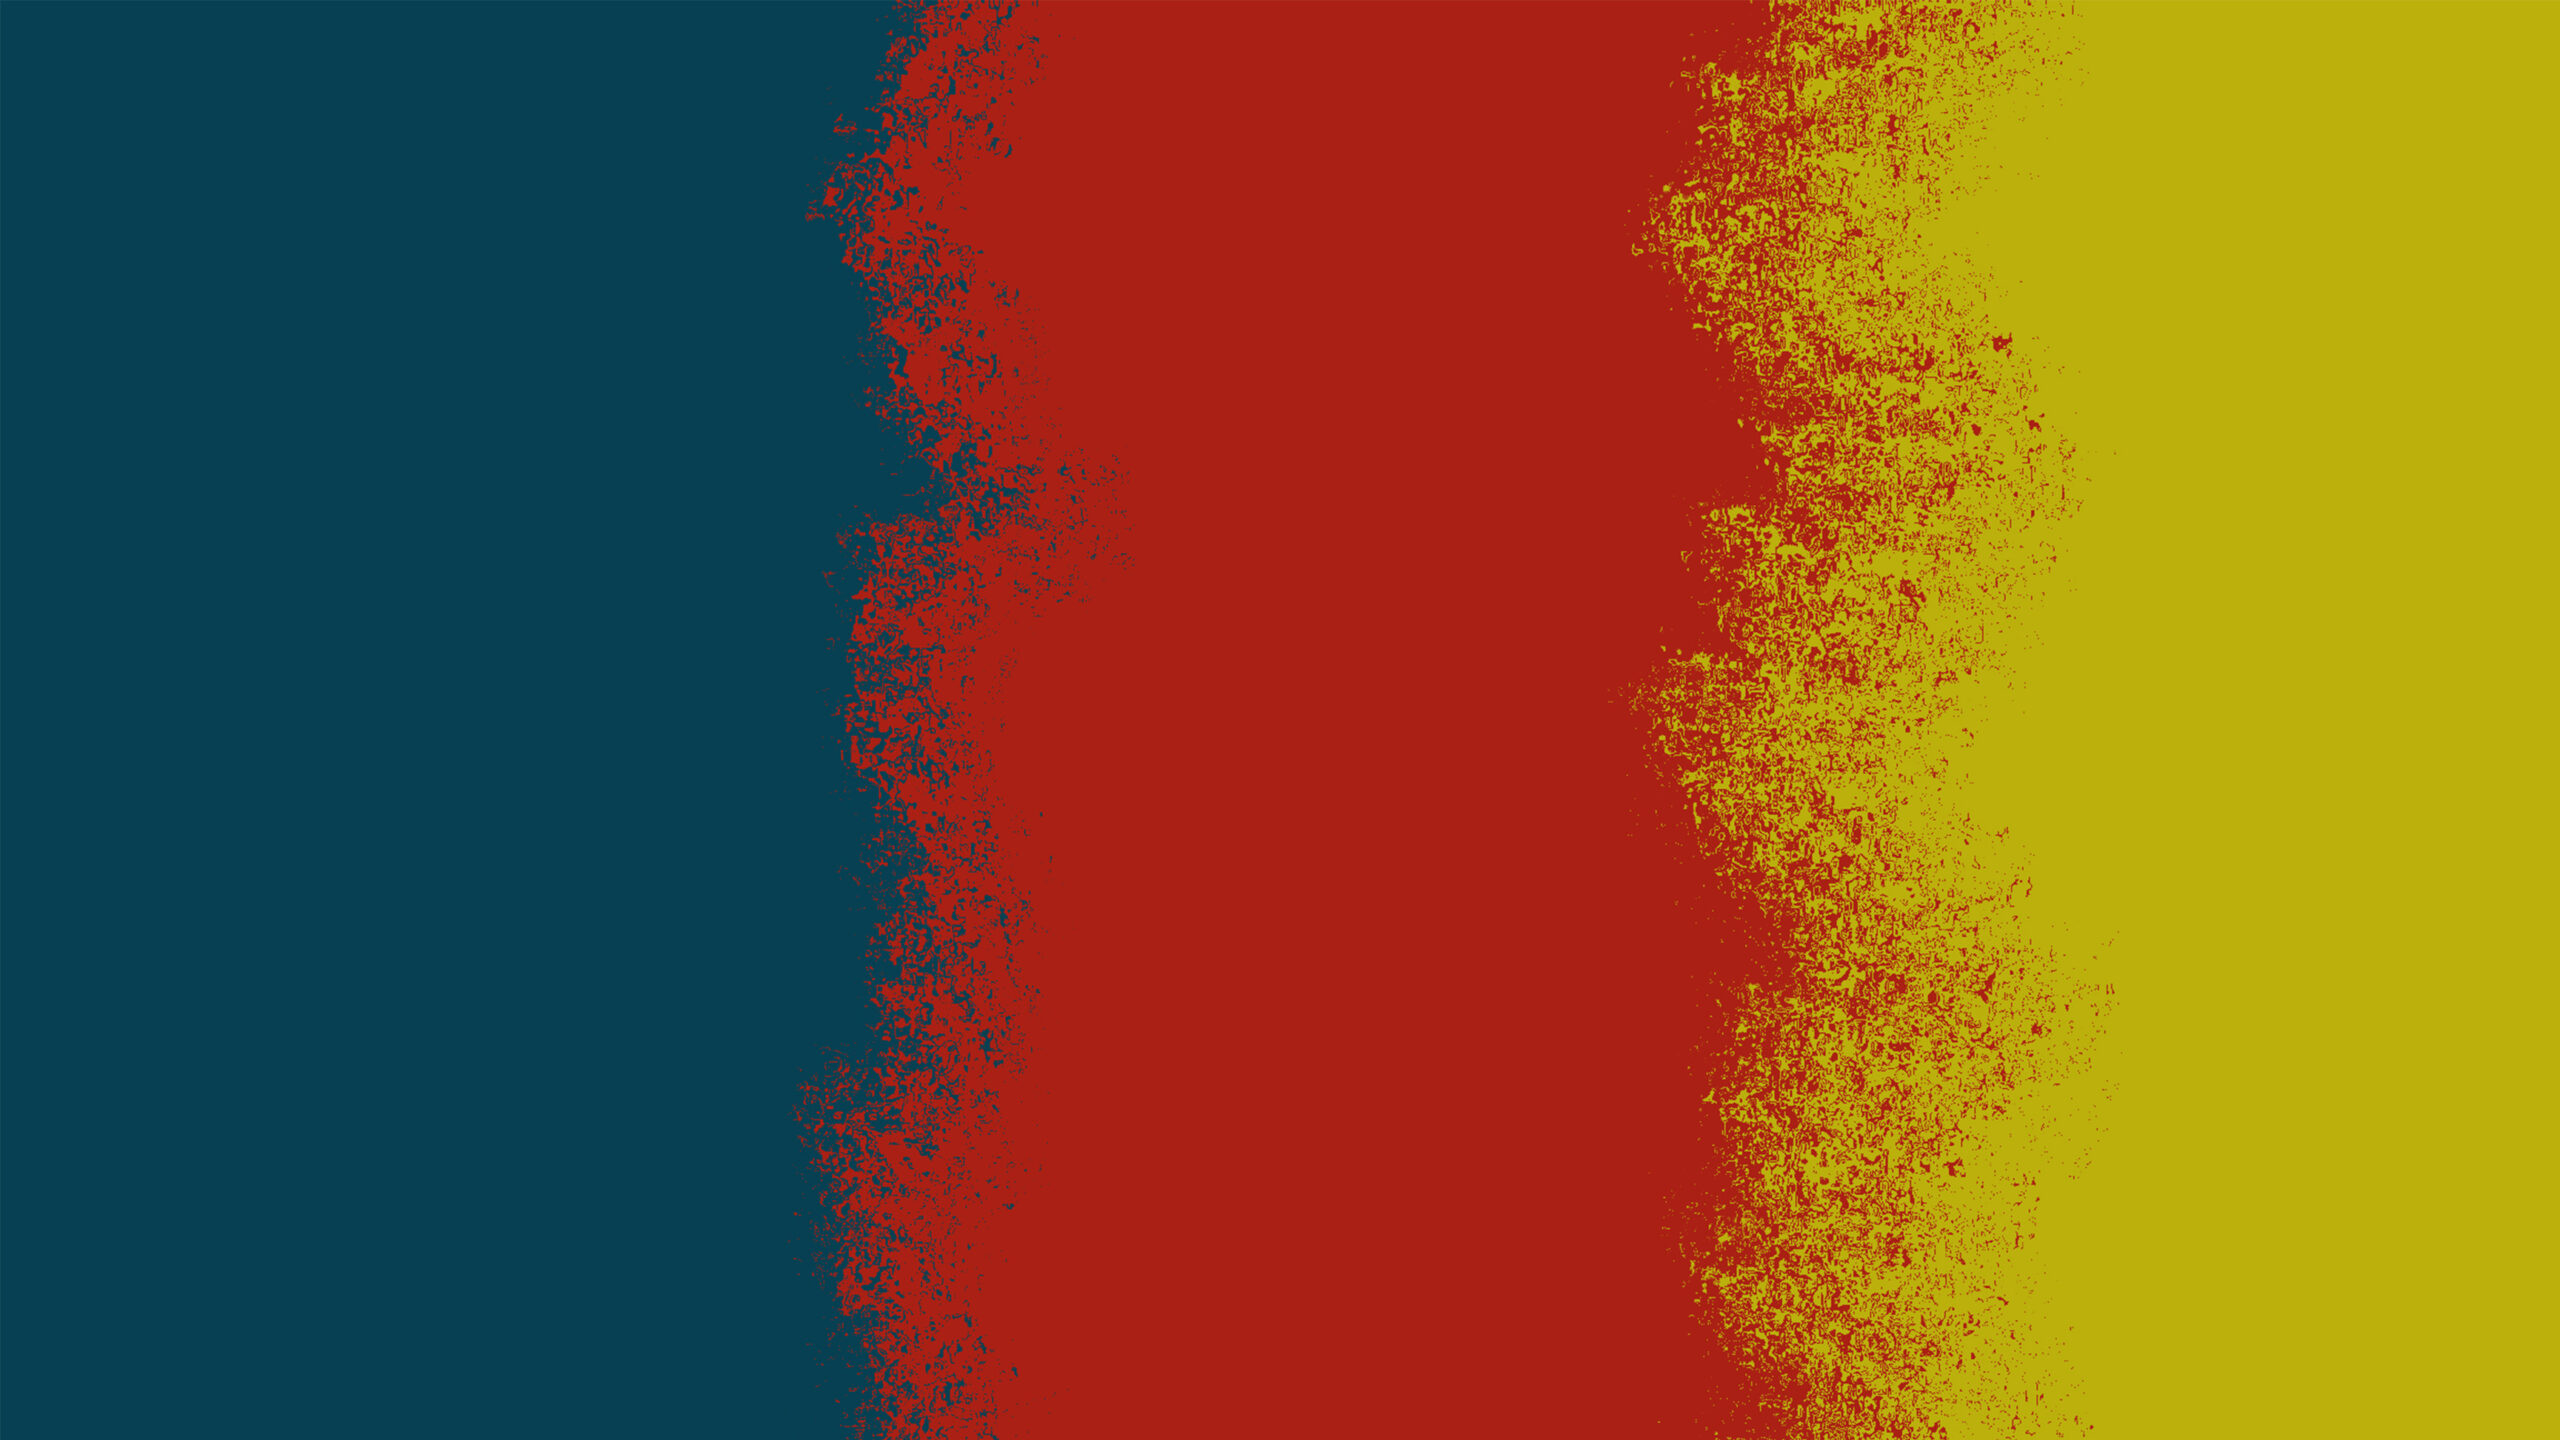 Dark turquoise, red and mustard yellow blocks of colour